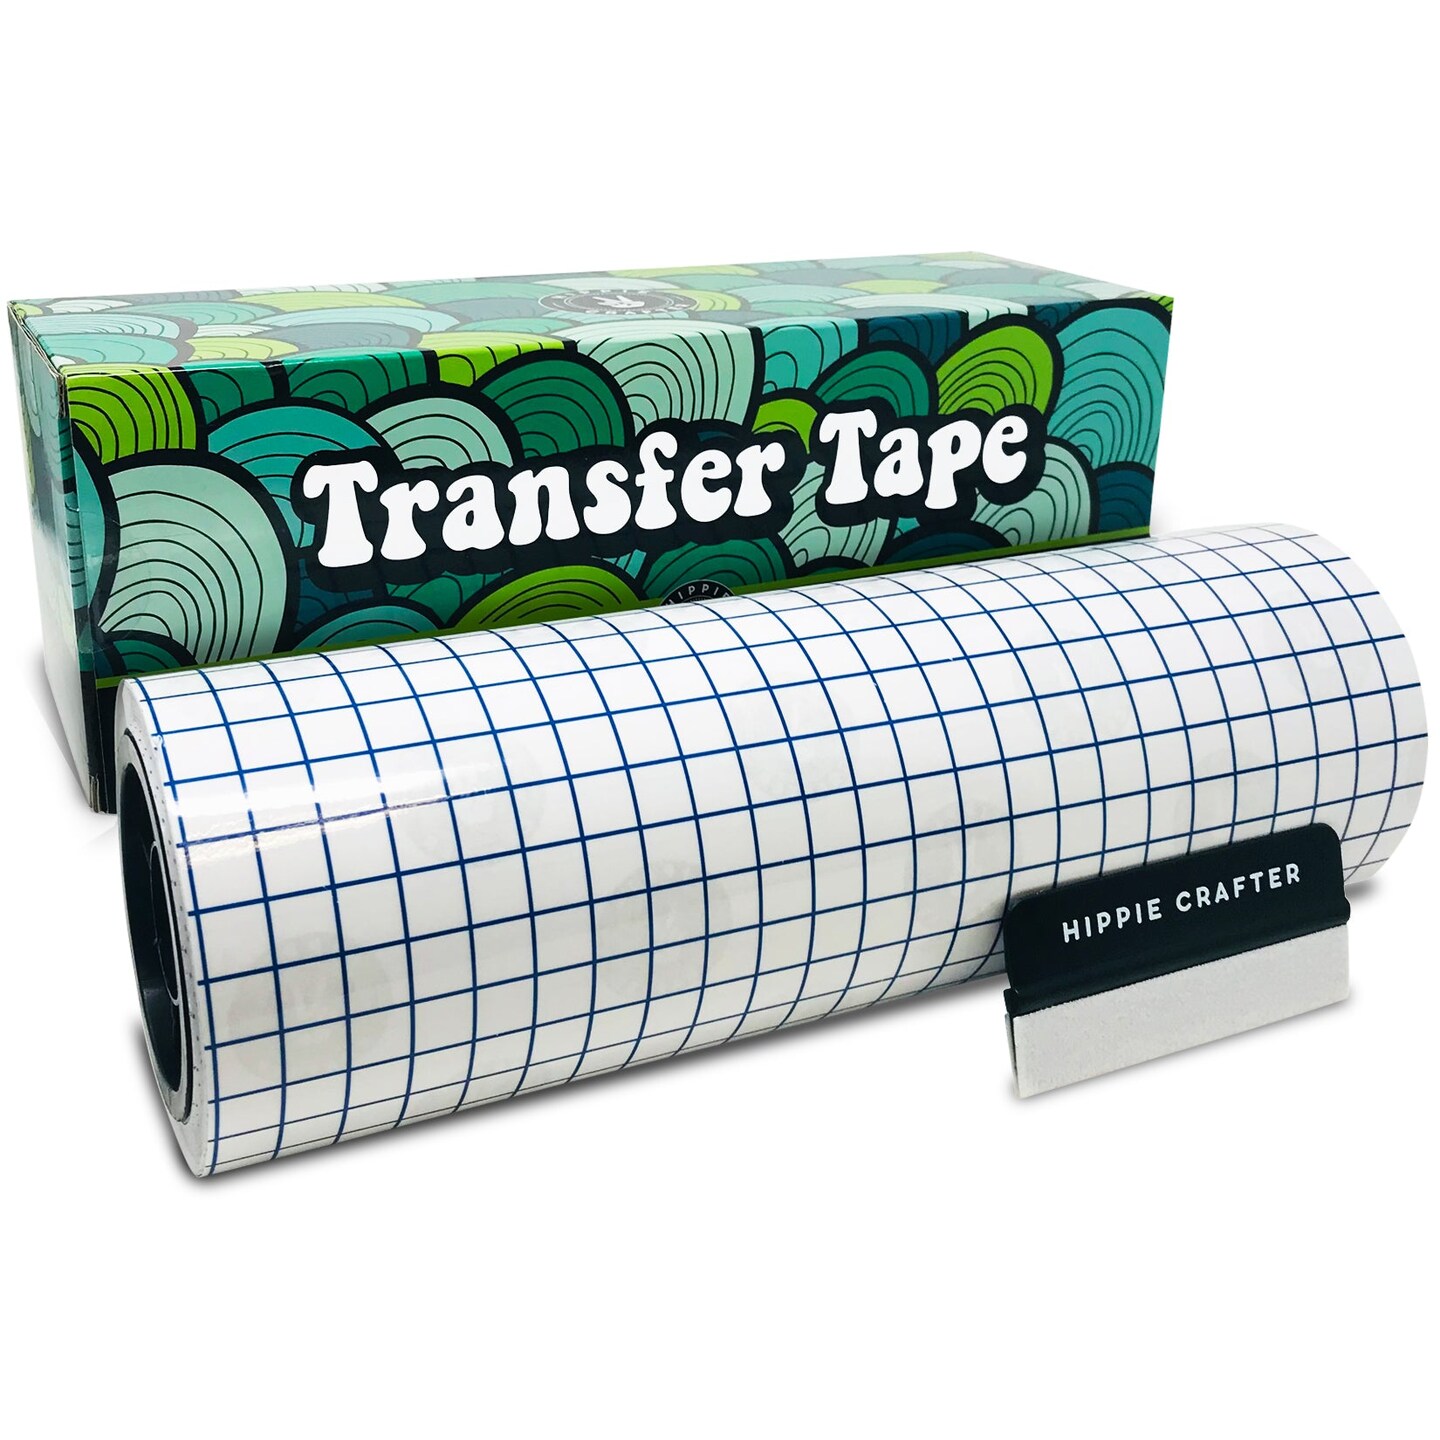 How to use vinyl transfer tape 